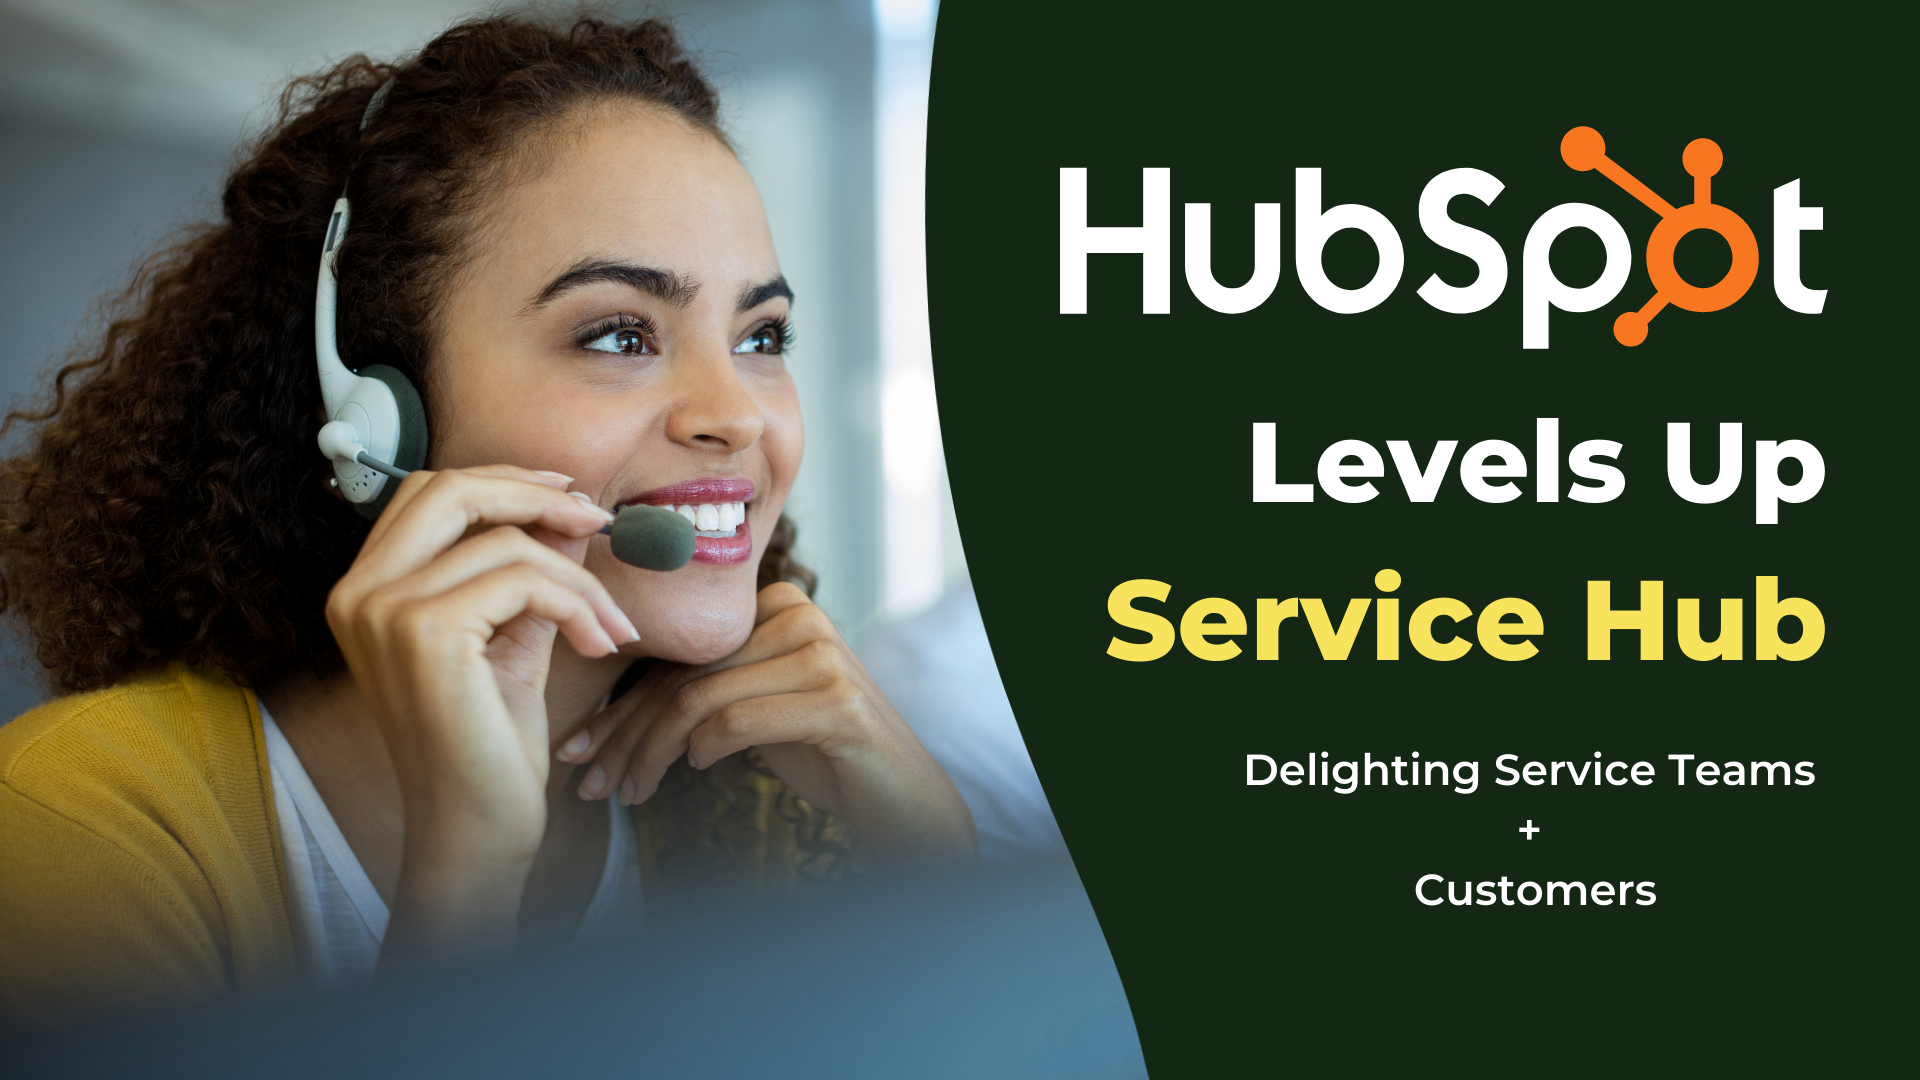 HubSpot Levels Up Its Service Hub: Everything You Need To Know